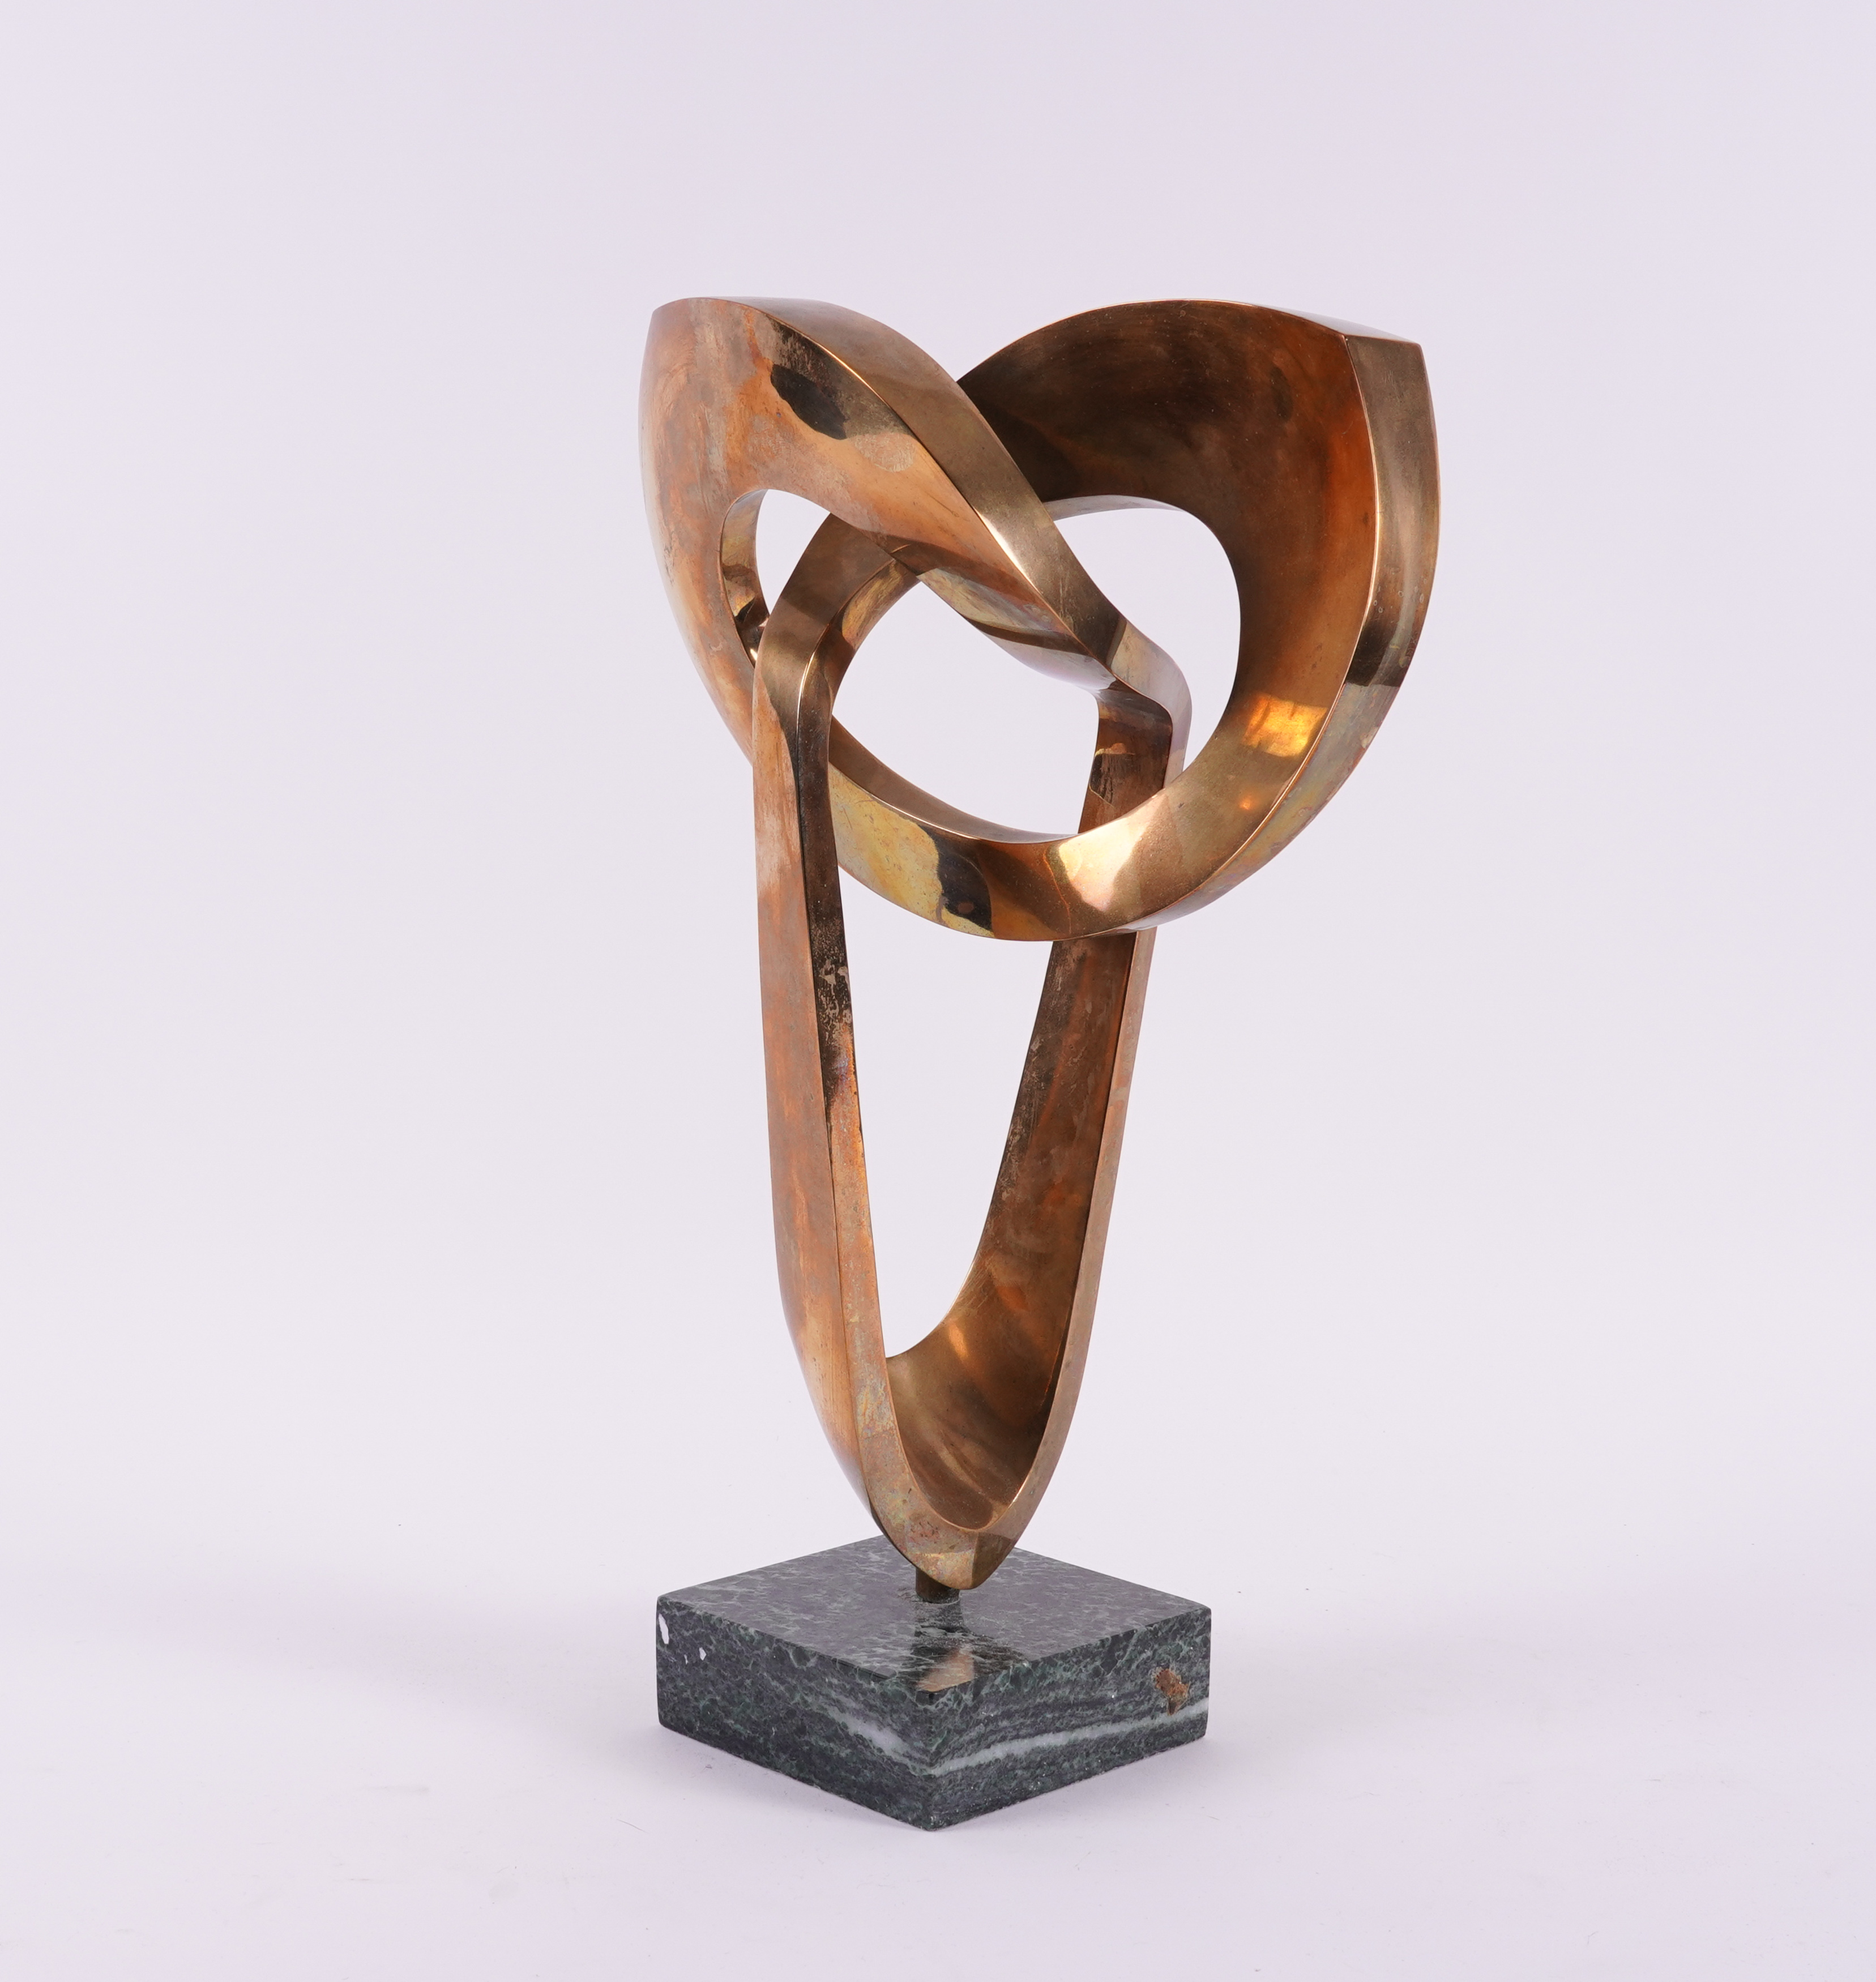 A MODERNIST POLISHED BRASS TWISTED SCULPTURE - Image 4 of 5